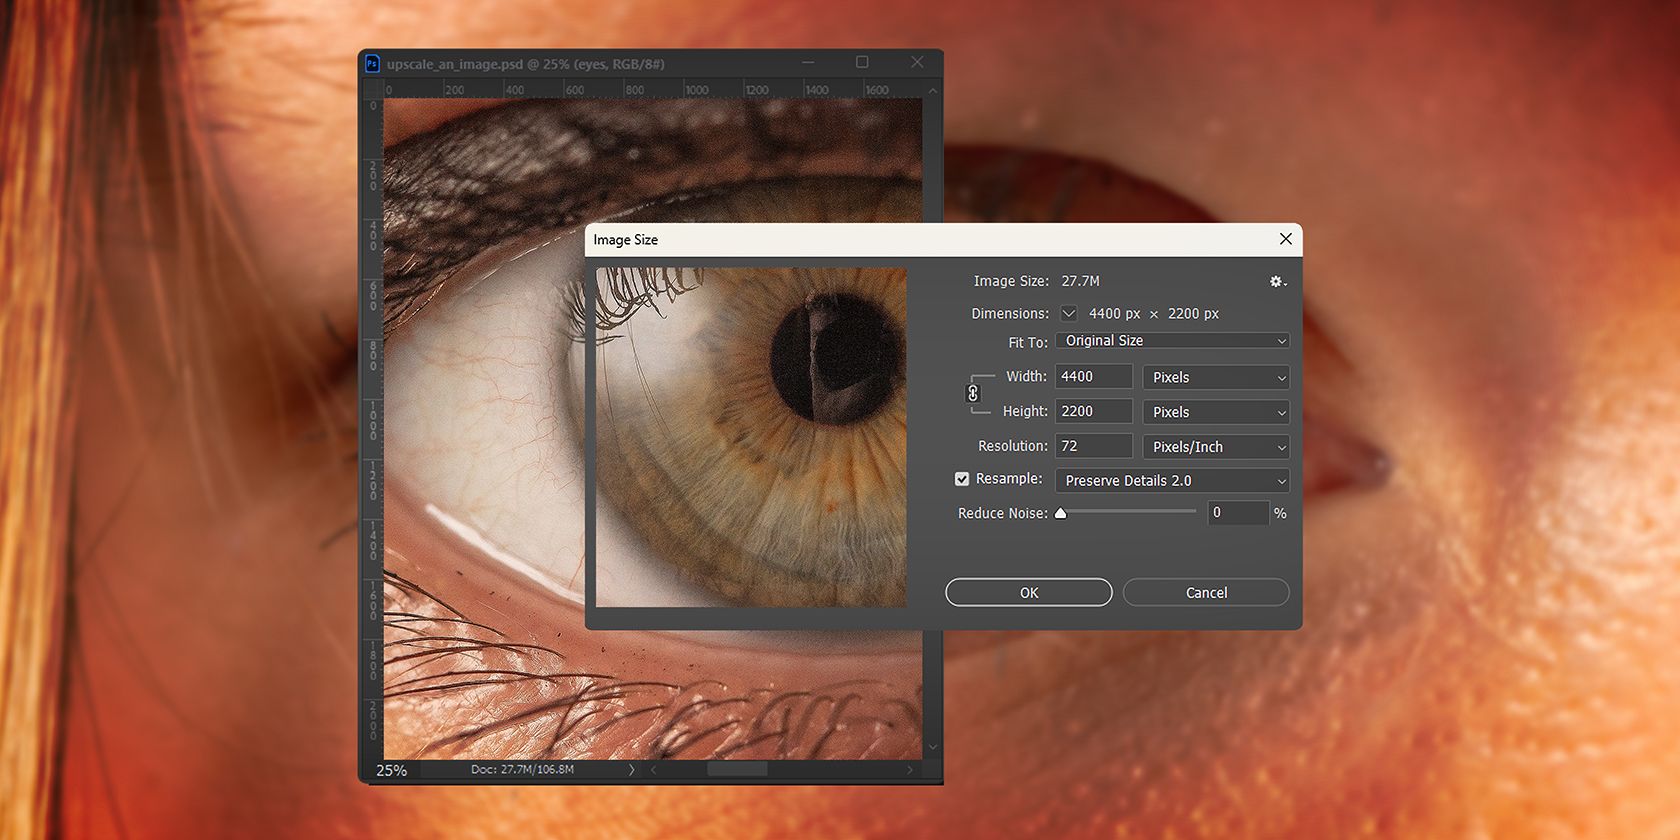 close-up of a human eye, overlaid with a graphic interface of an image editing software displaying the ‘Image Size’ settings